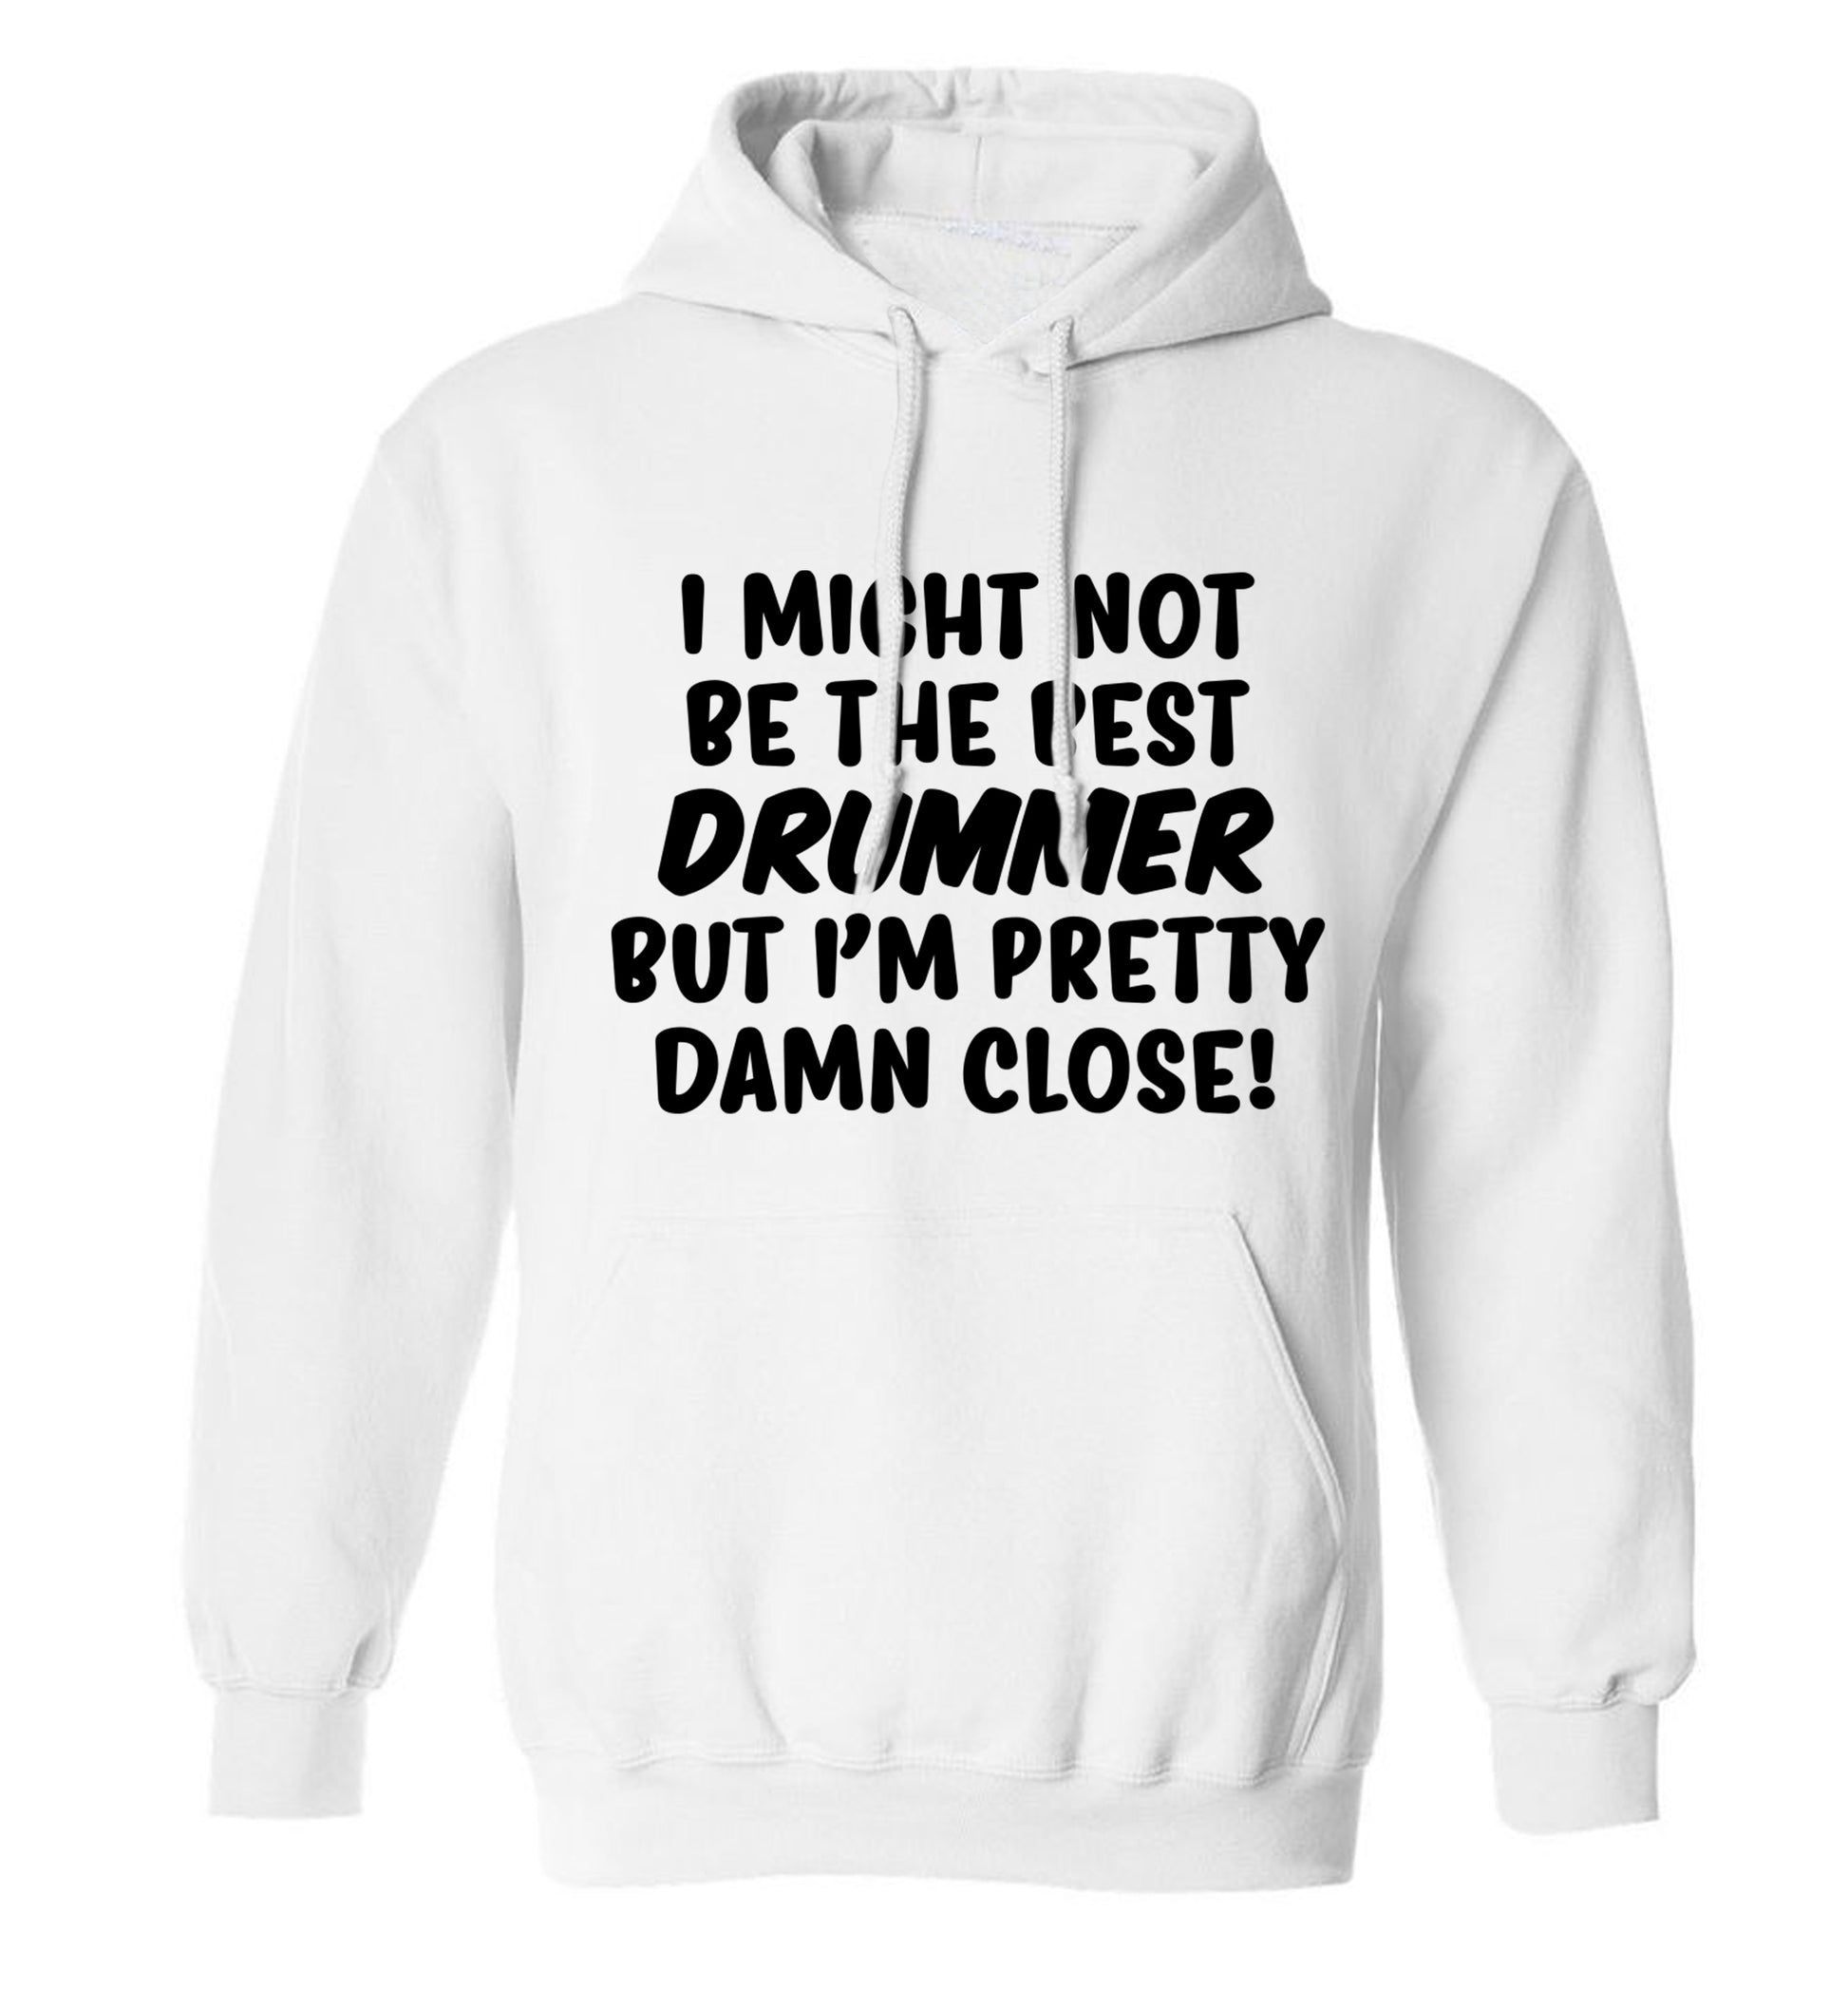 I might not be the best drummer but I'm pretty close! adults unisexwhite hoodie 2XL